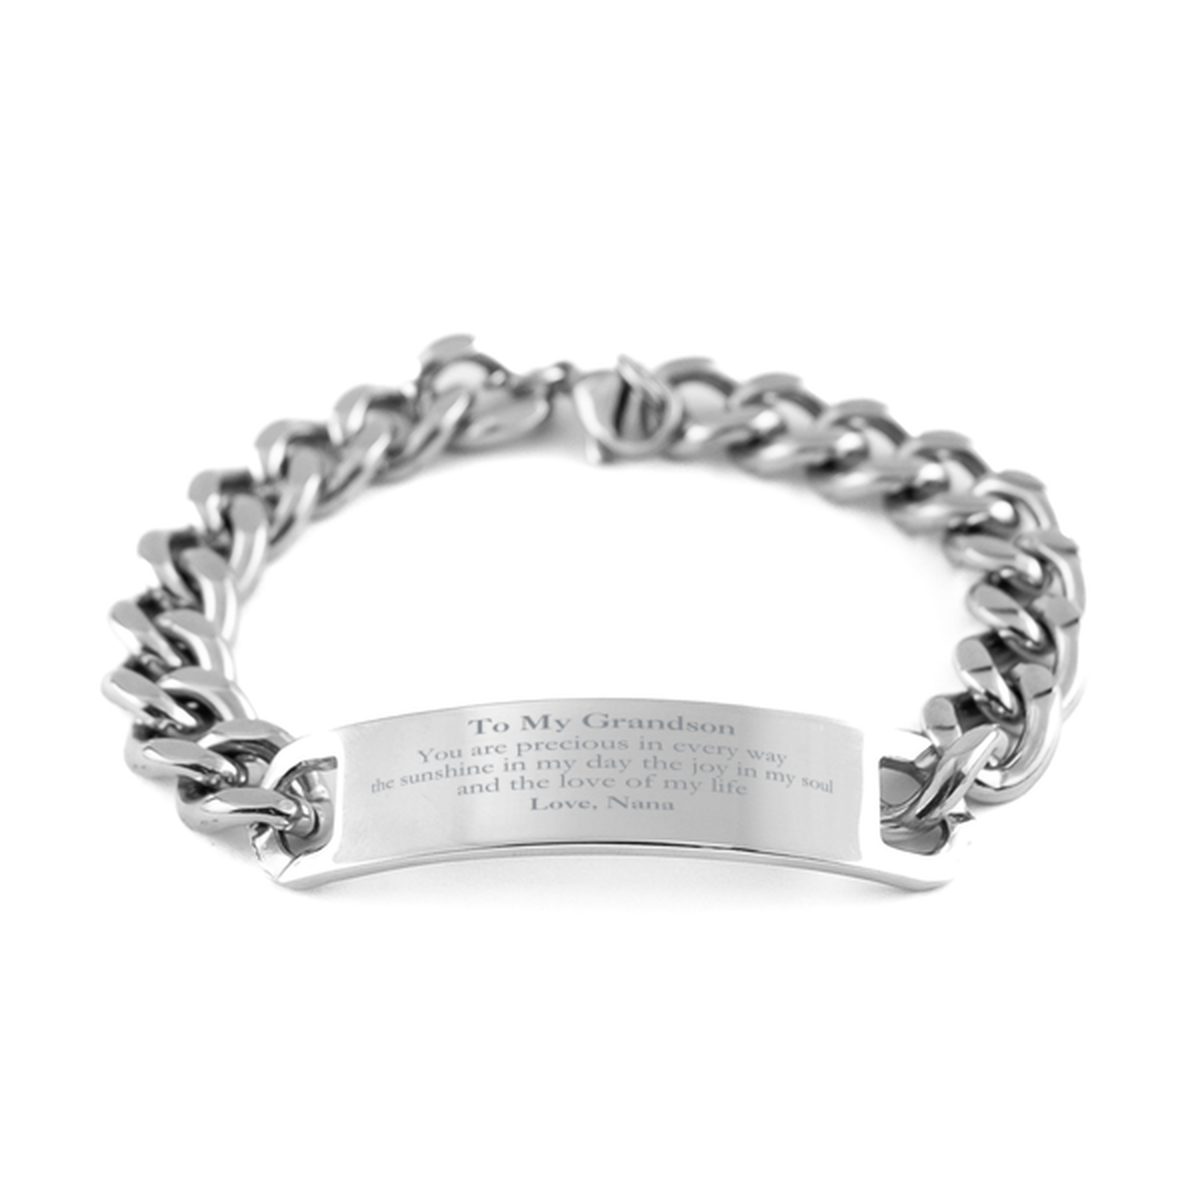 Graduation Gifts for Grandson Cuban Chain Stainless Steel Bracelet Present from Nana, Christmas Grandson Birthday Gifts Grandson You are precious in every way the sunshine in my day. Love, Nana